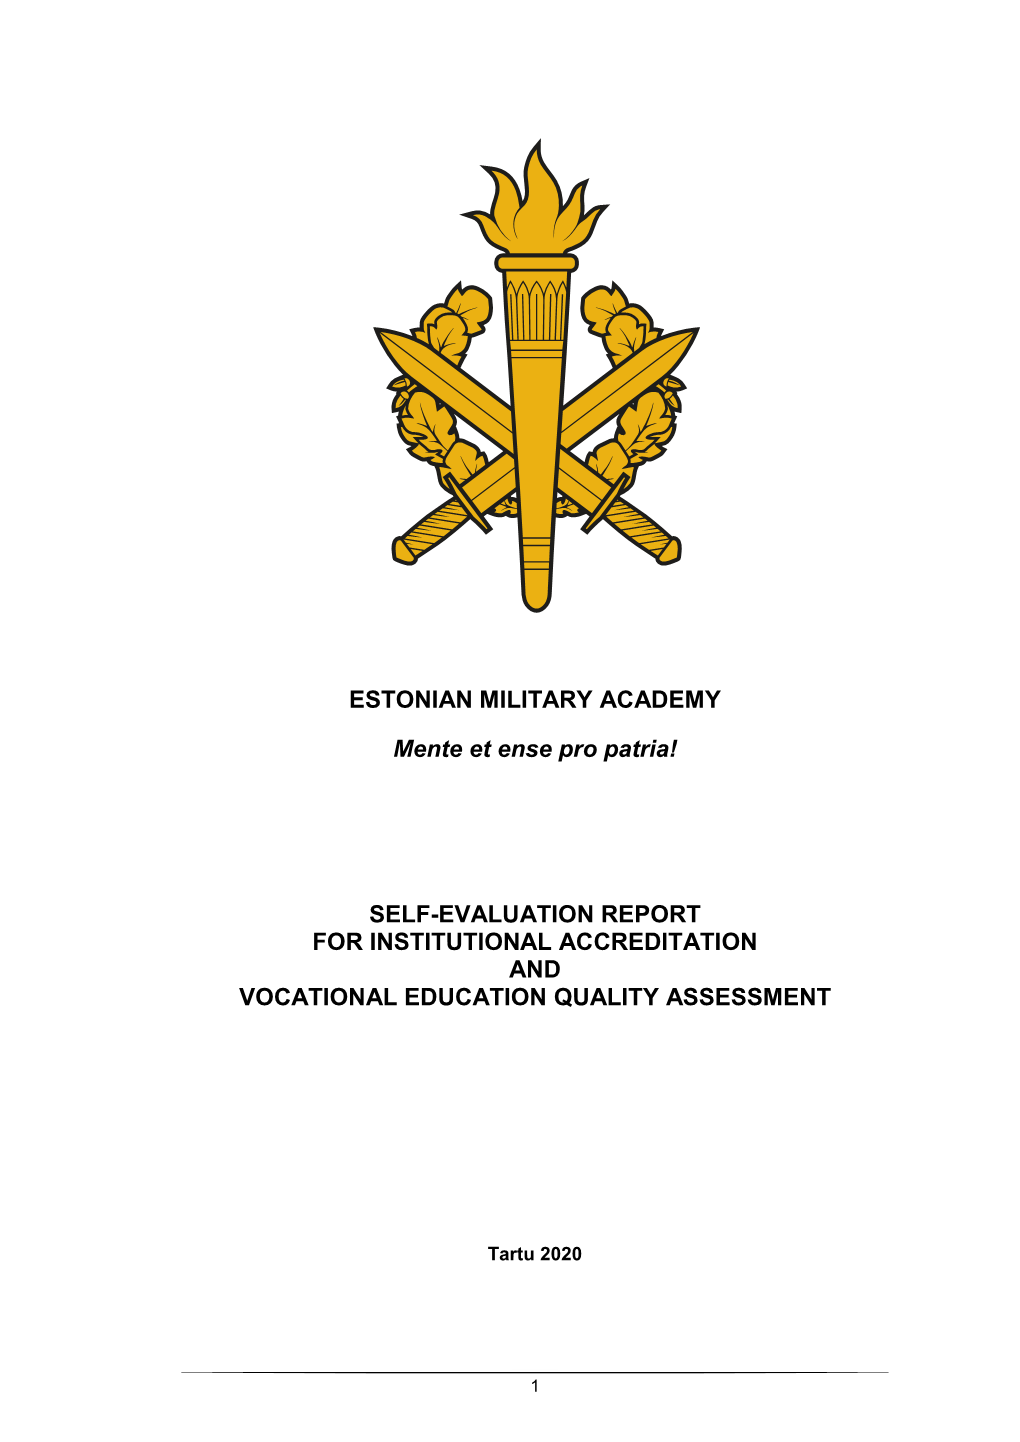 Self-Evaluation Report for Institutional Accreditation and Vocational Education Quality Assessment